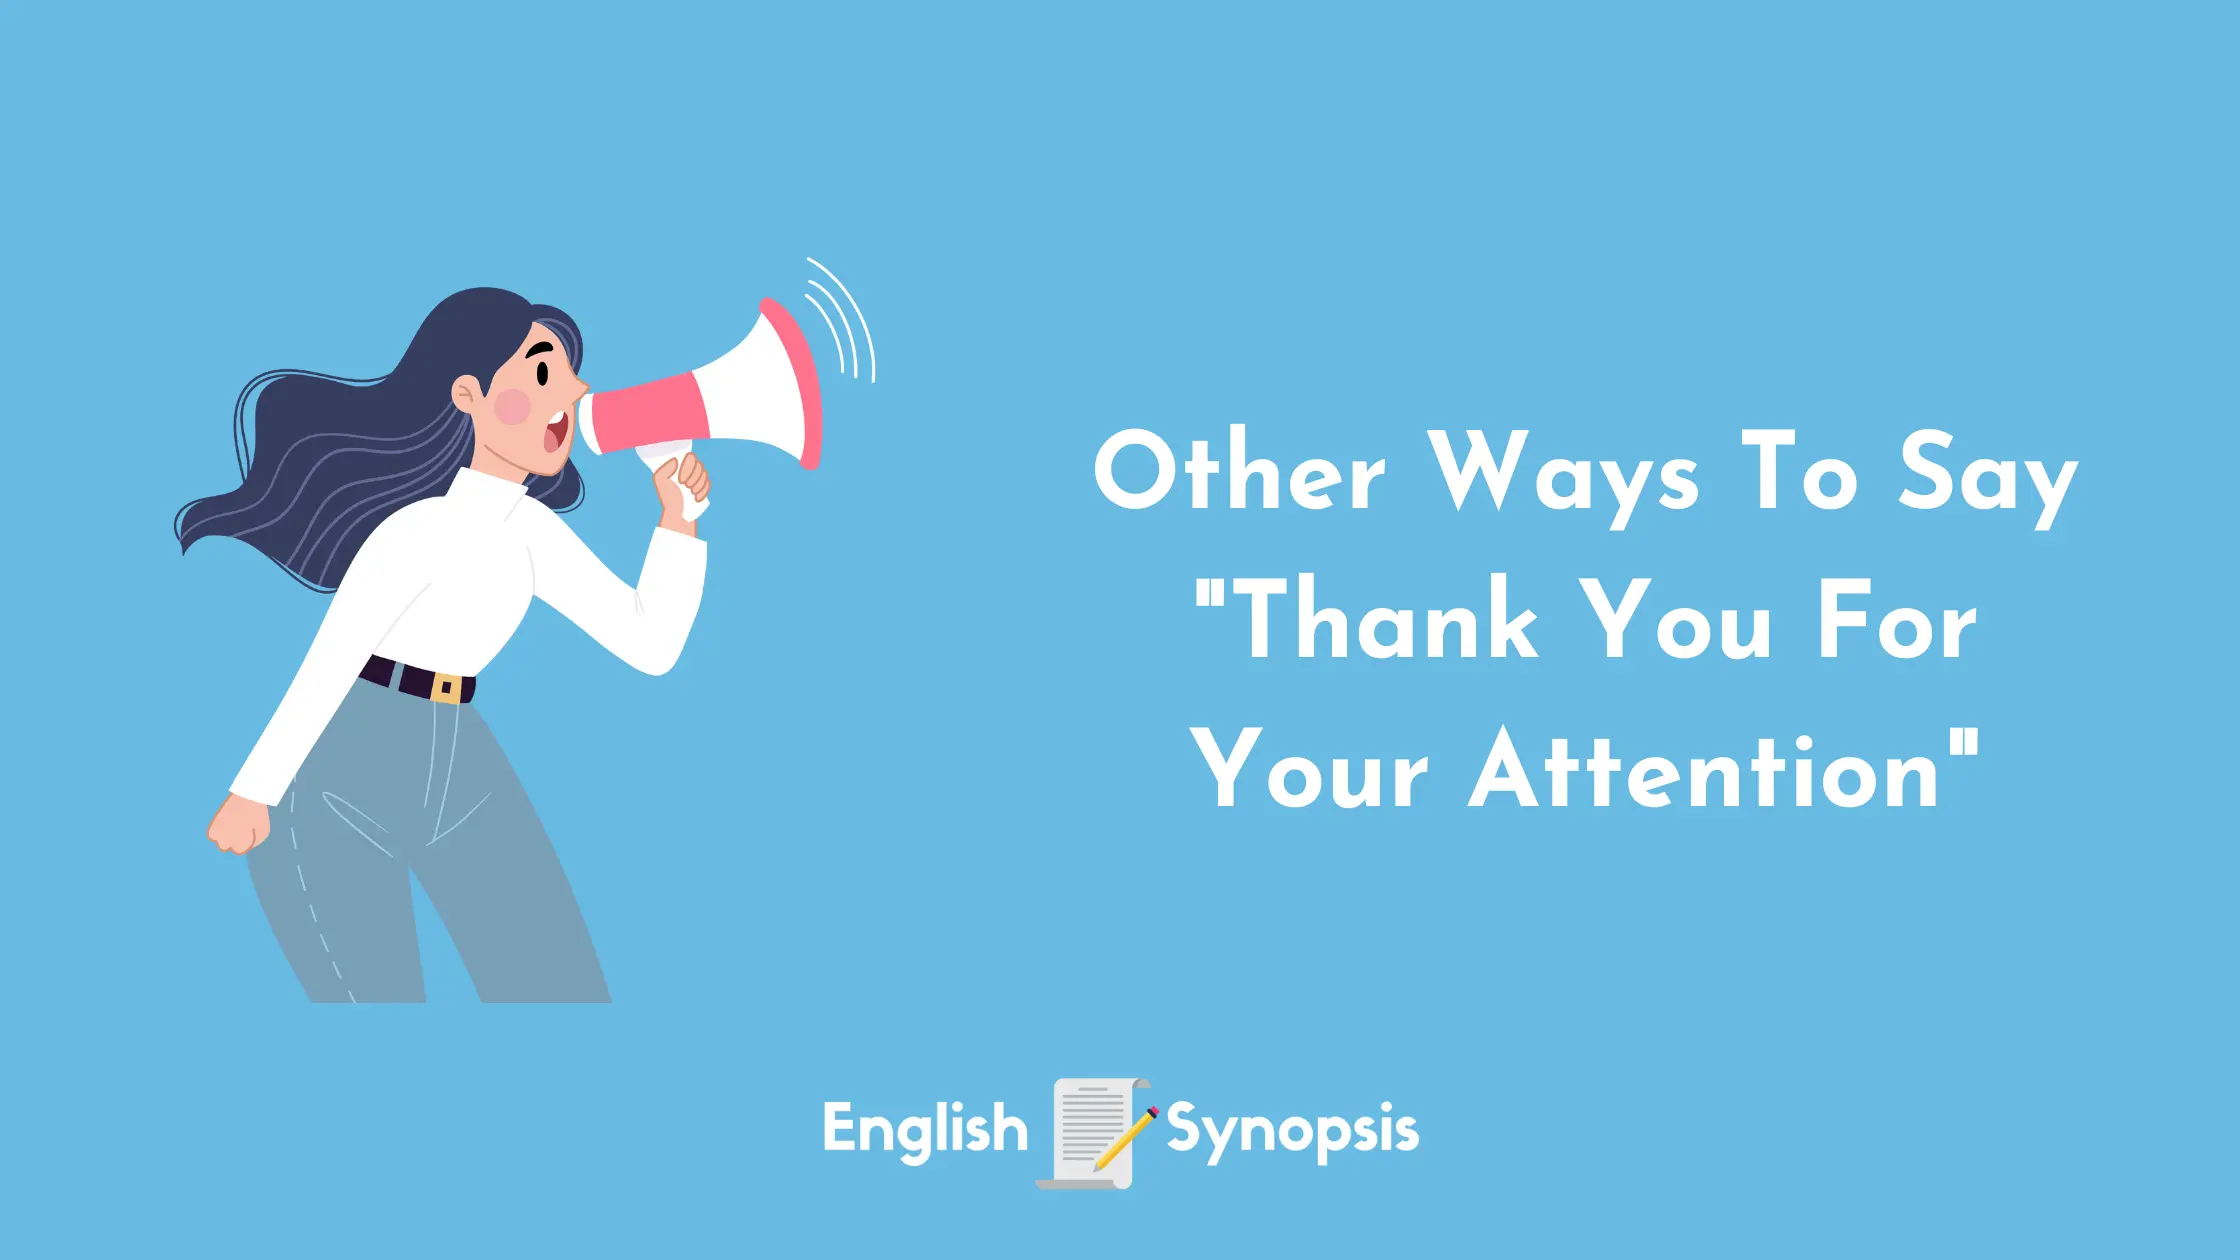 Other Ways To Say "Thank You For Your Attention"